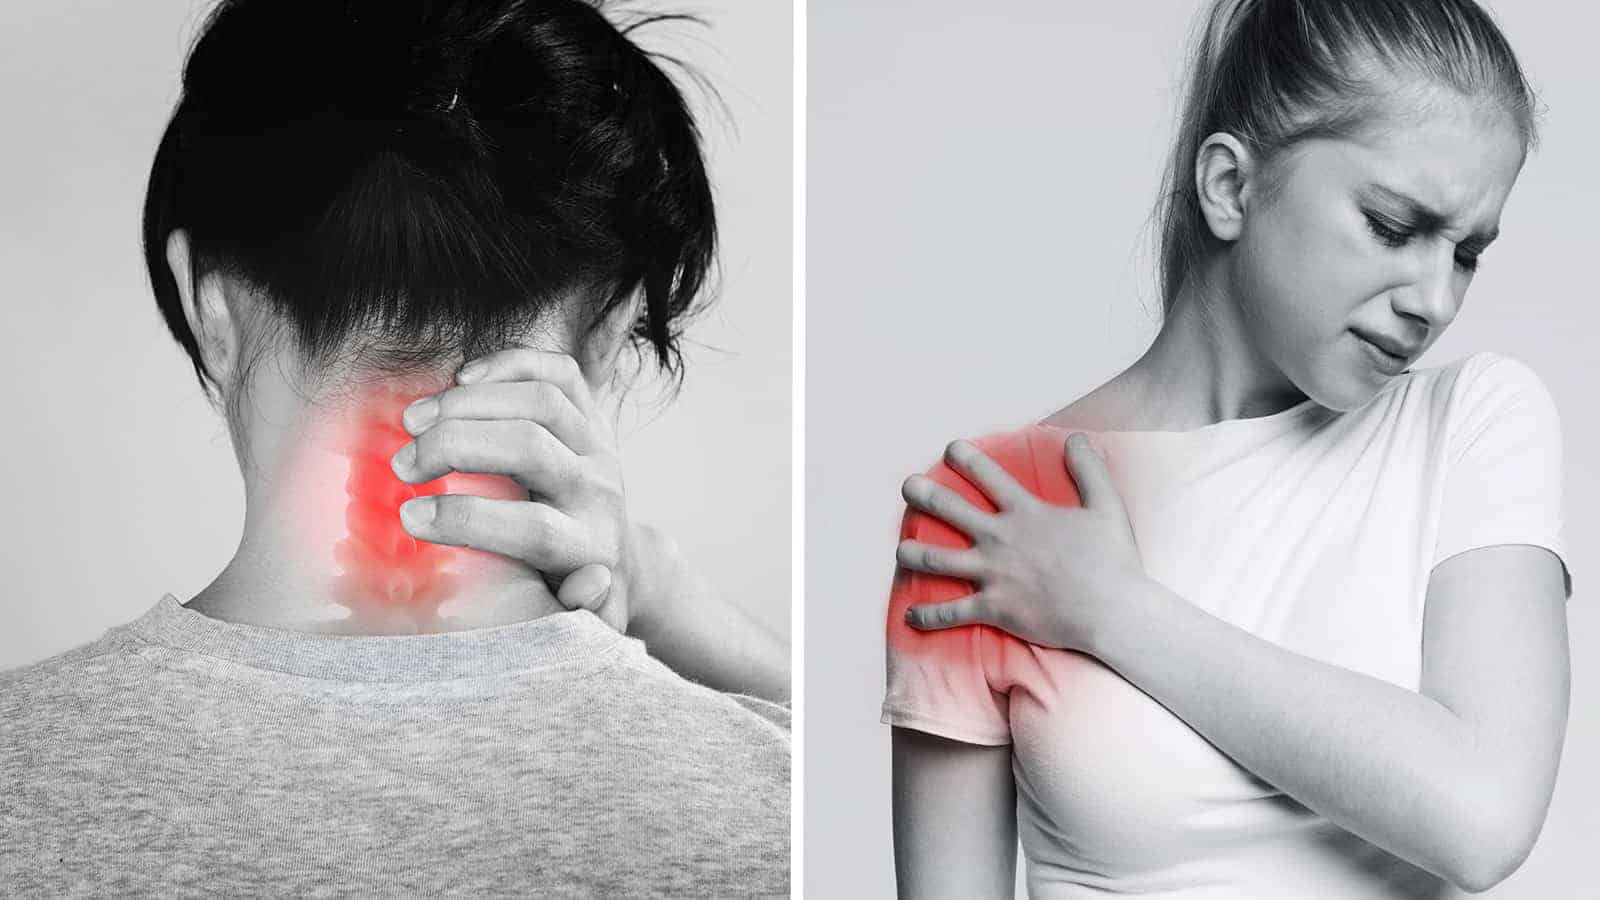 neck and shoulder pain